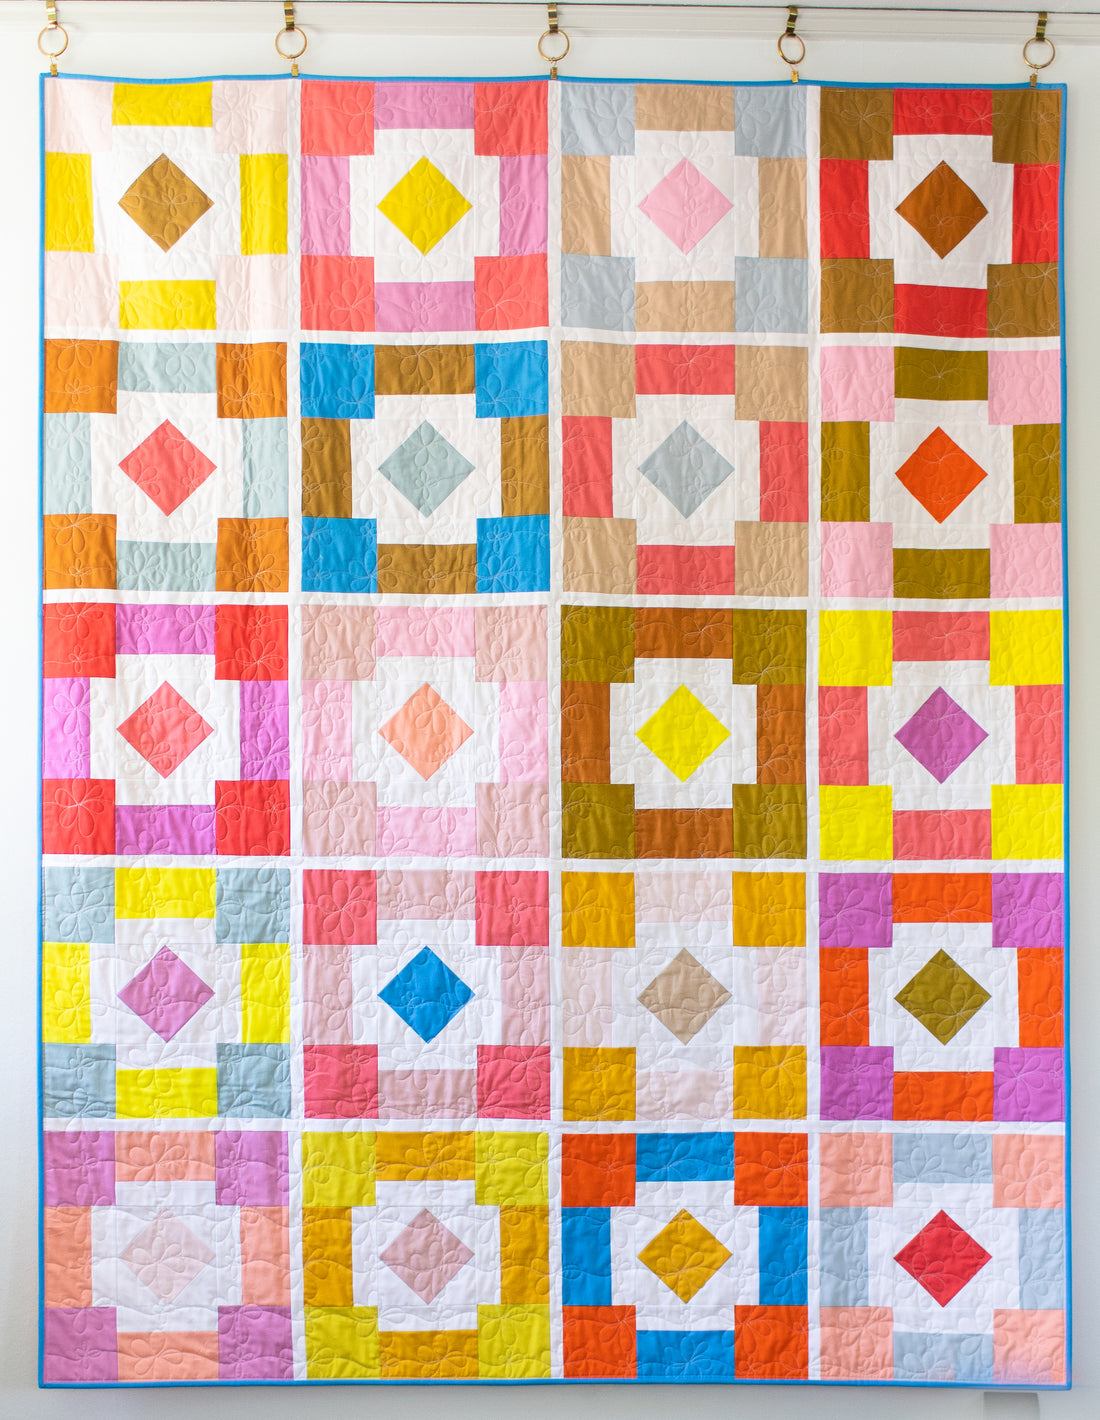 Backyard Party Quilt - the Cover Quilt